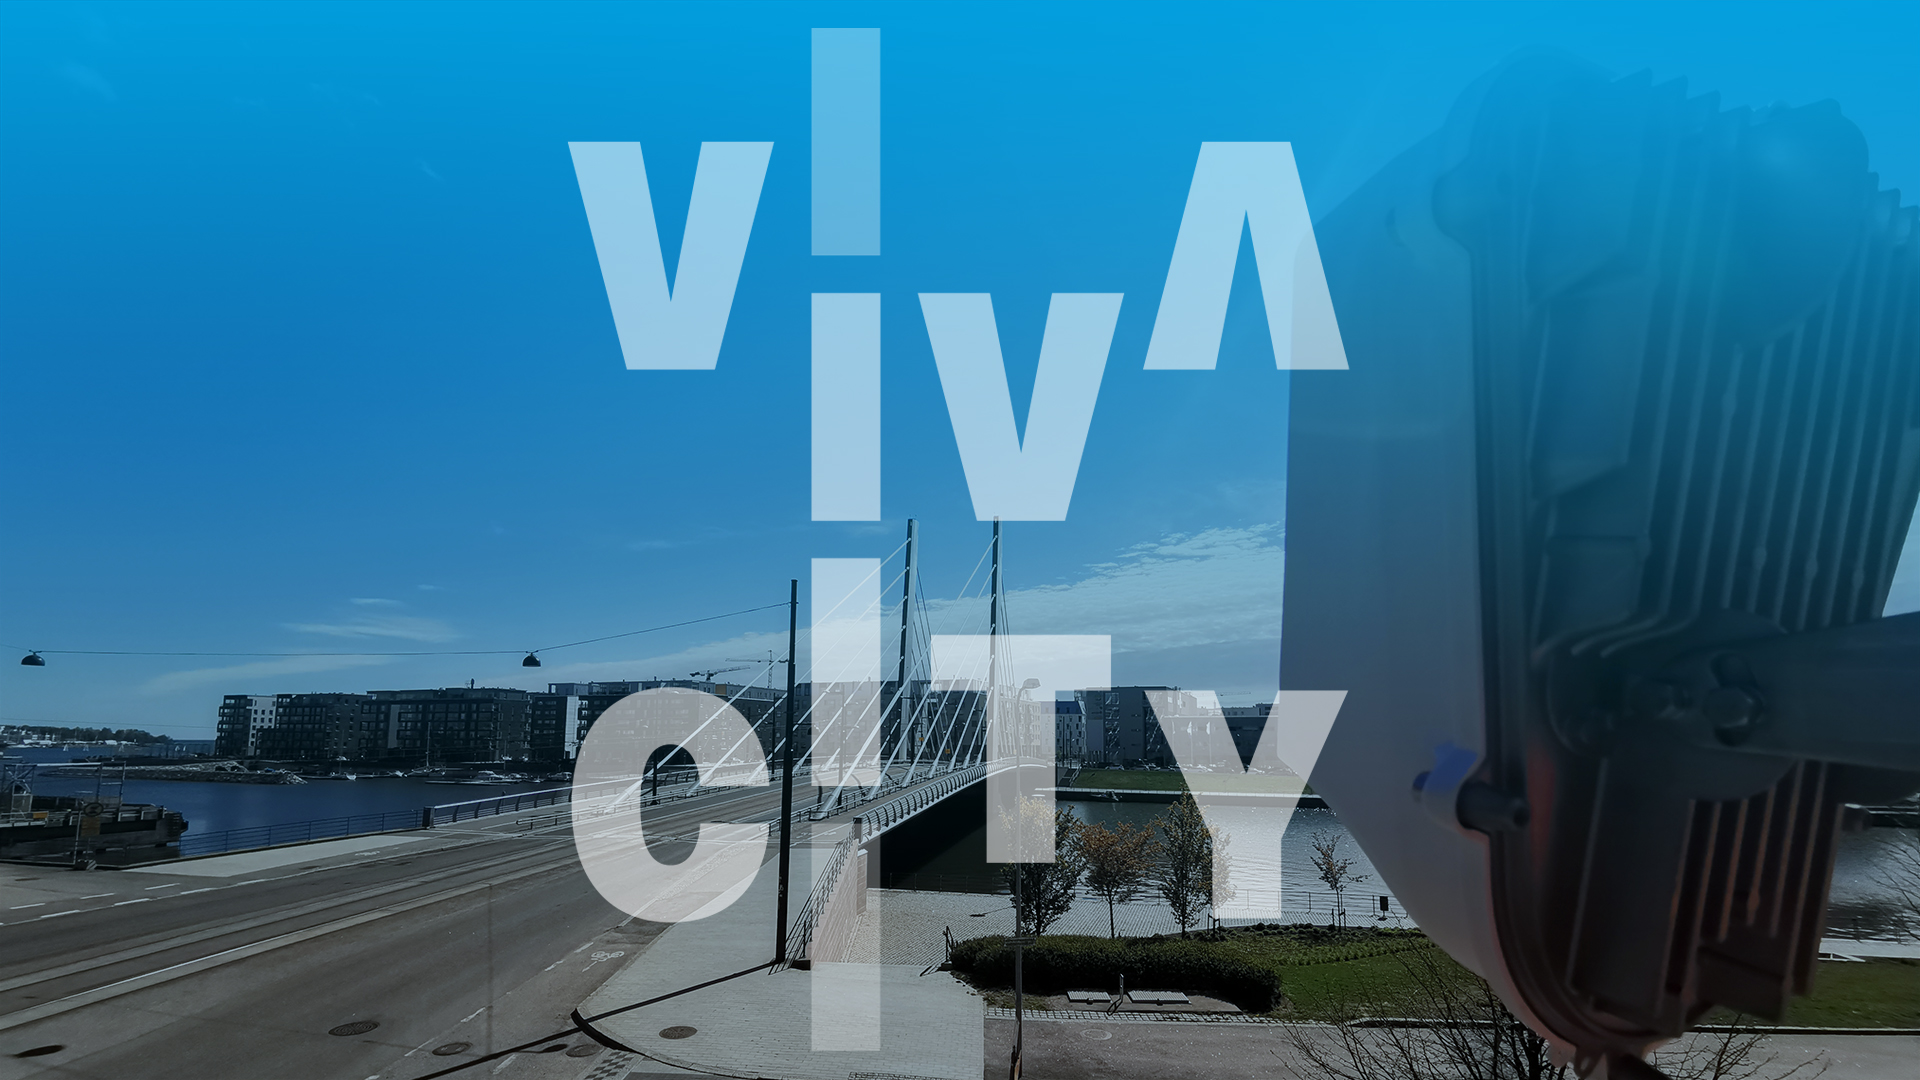 Image of VivaCity sensor installed in the city